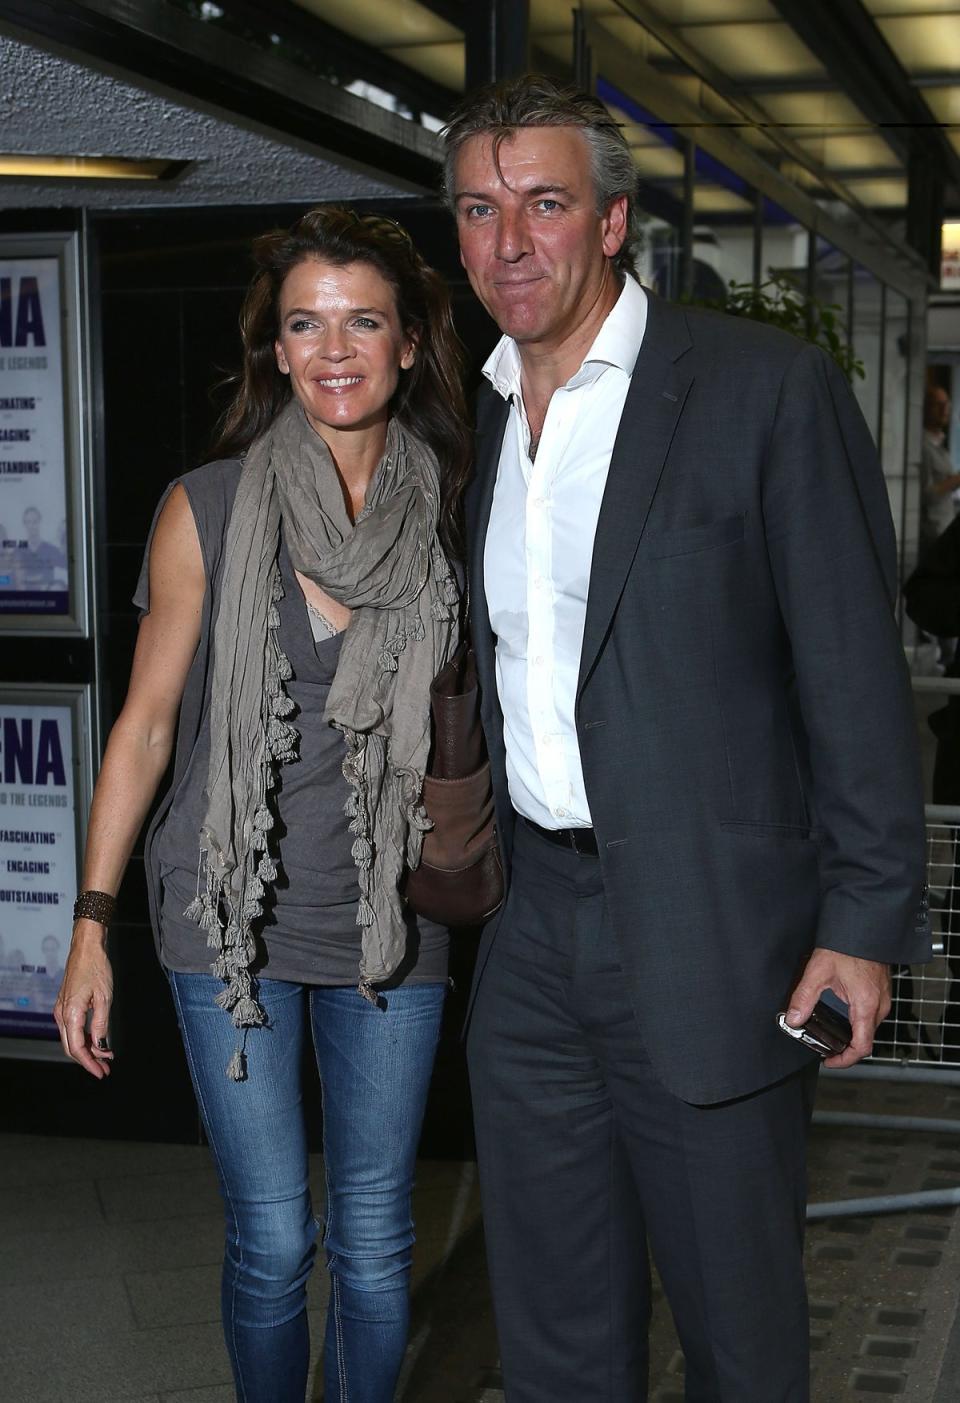 Croft and Coleman met while filming a show about yacht racing (Getty Images)